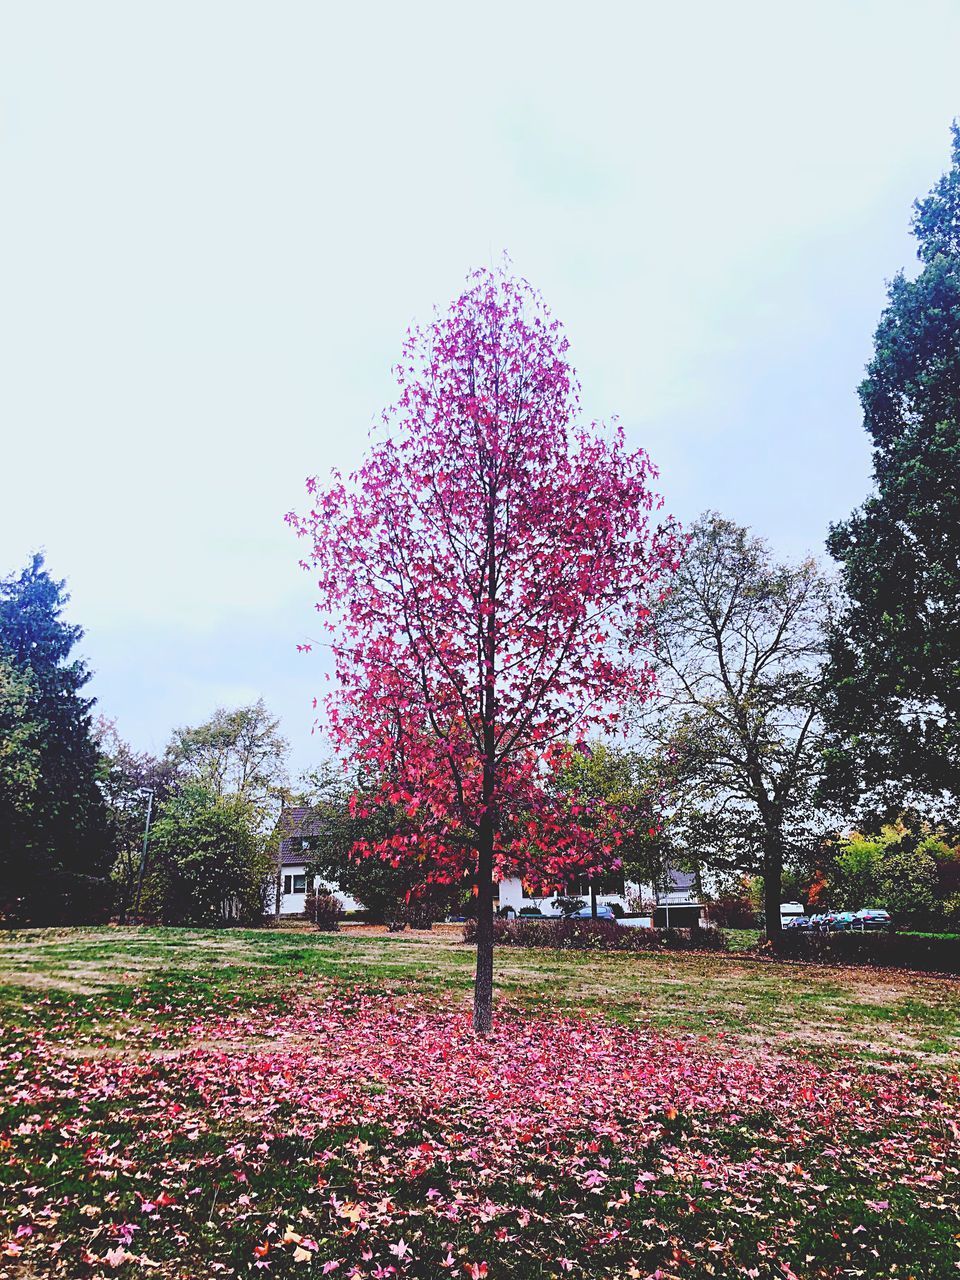 PINK CHERRY BLOSSOM TREE IN PARK